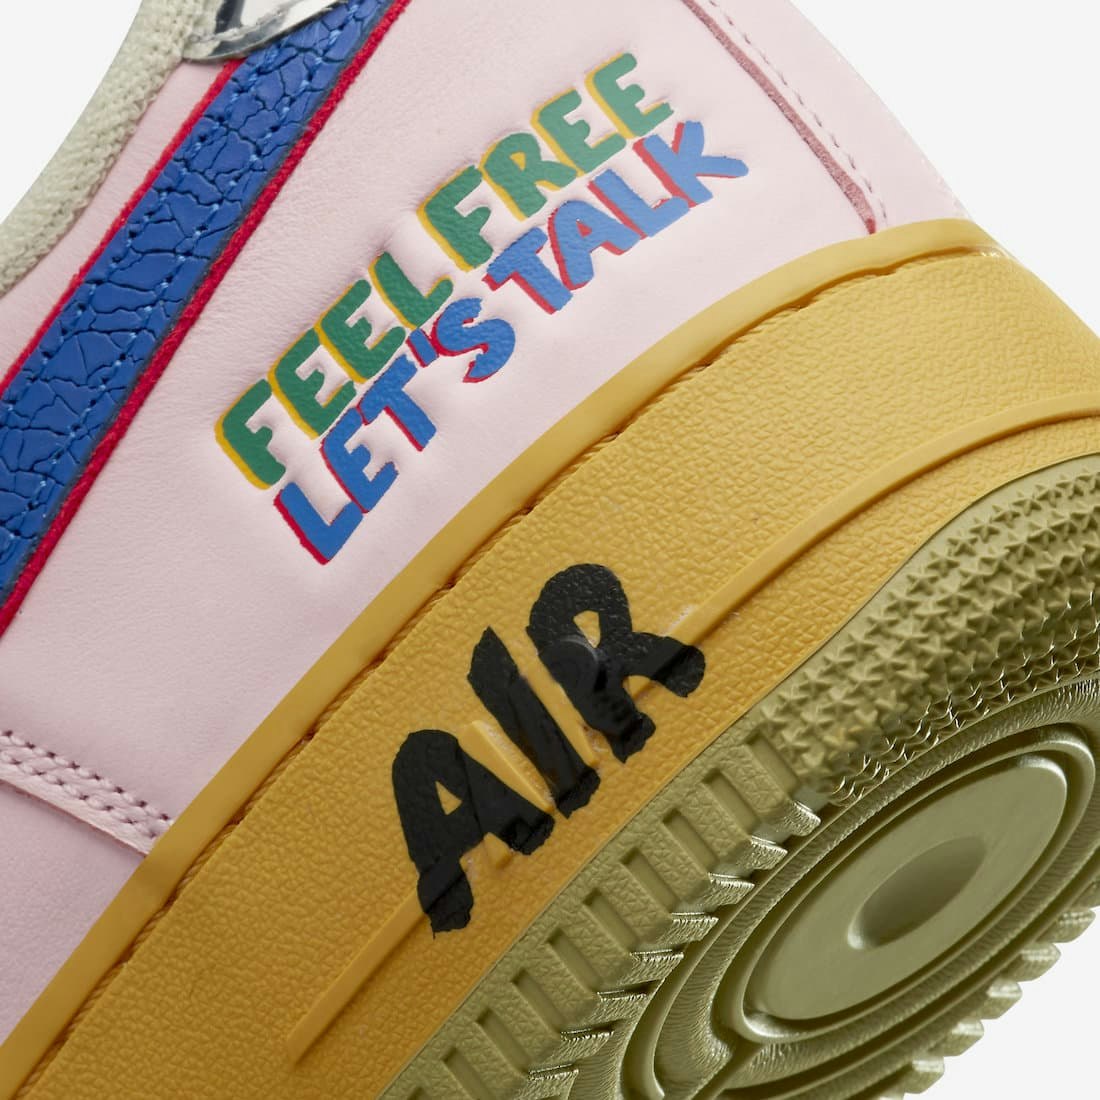 Nike Air Force 1 Low "Feel Free, Let’s Talk"